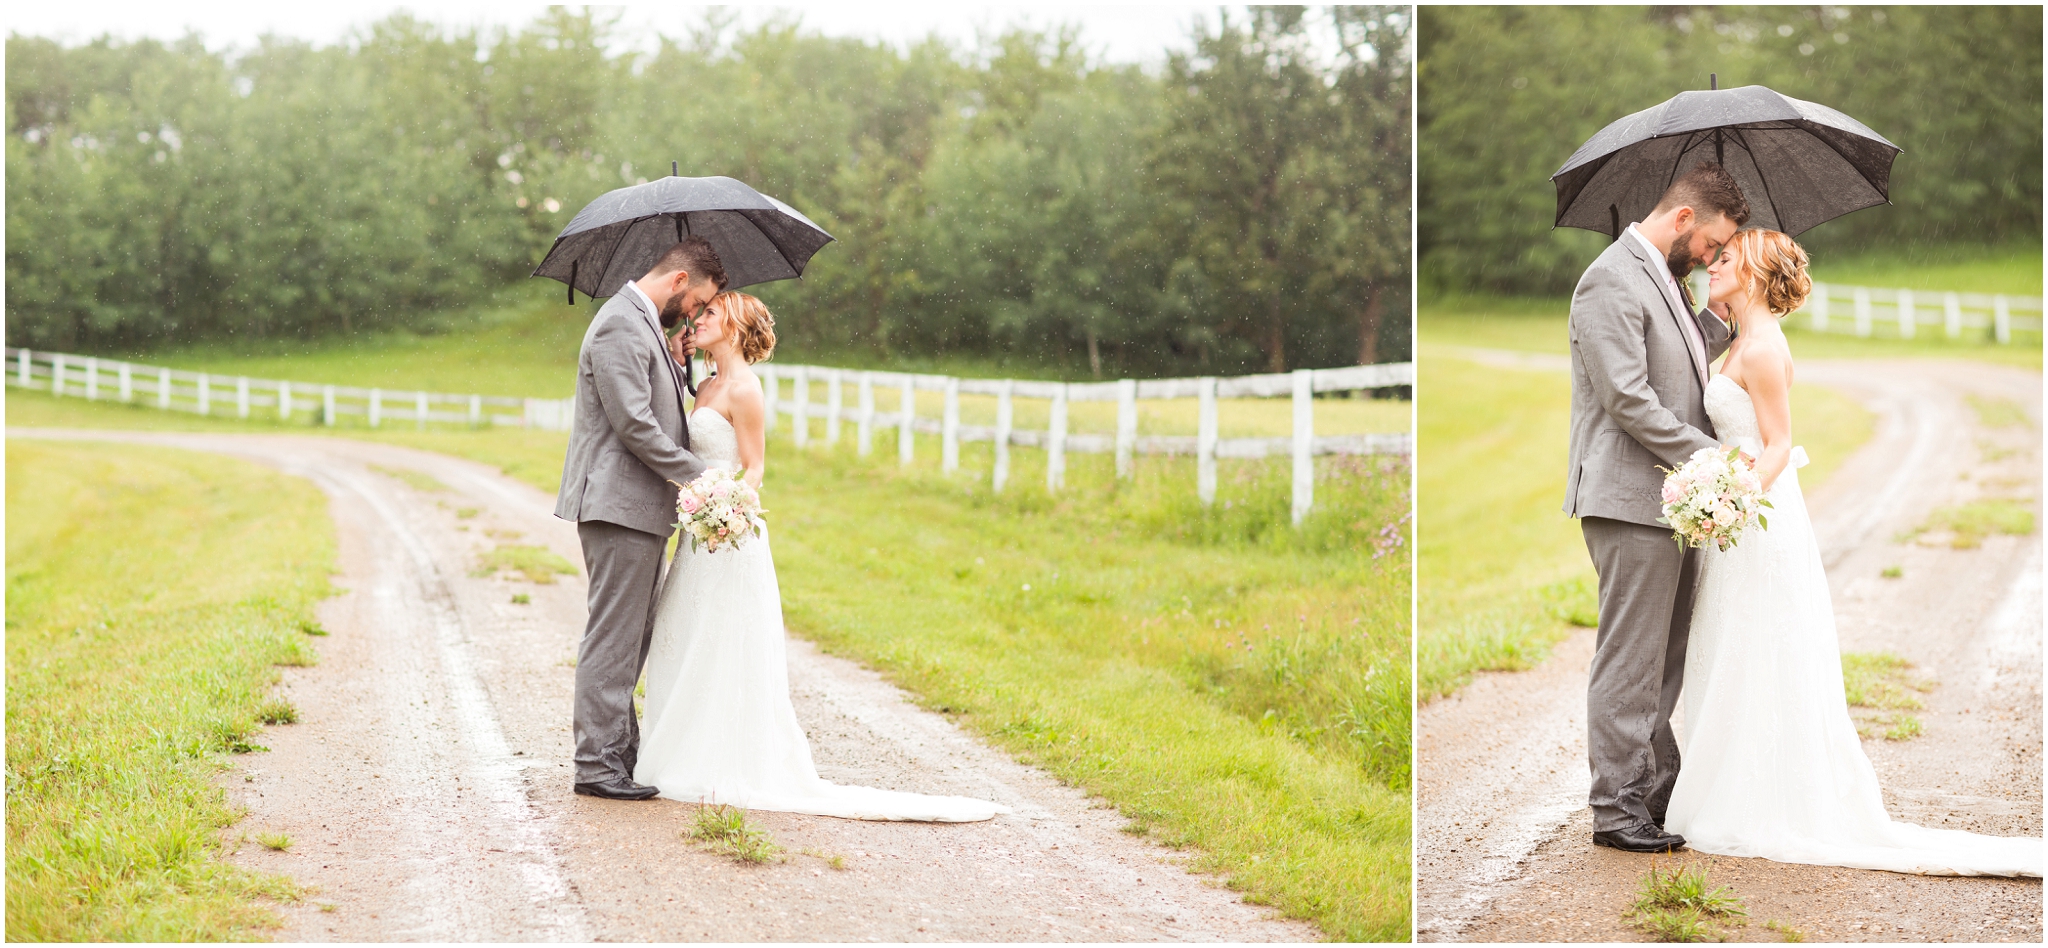 bride and groom photos in the rain